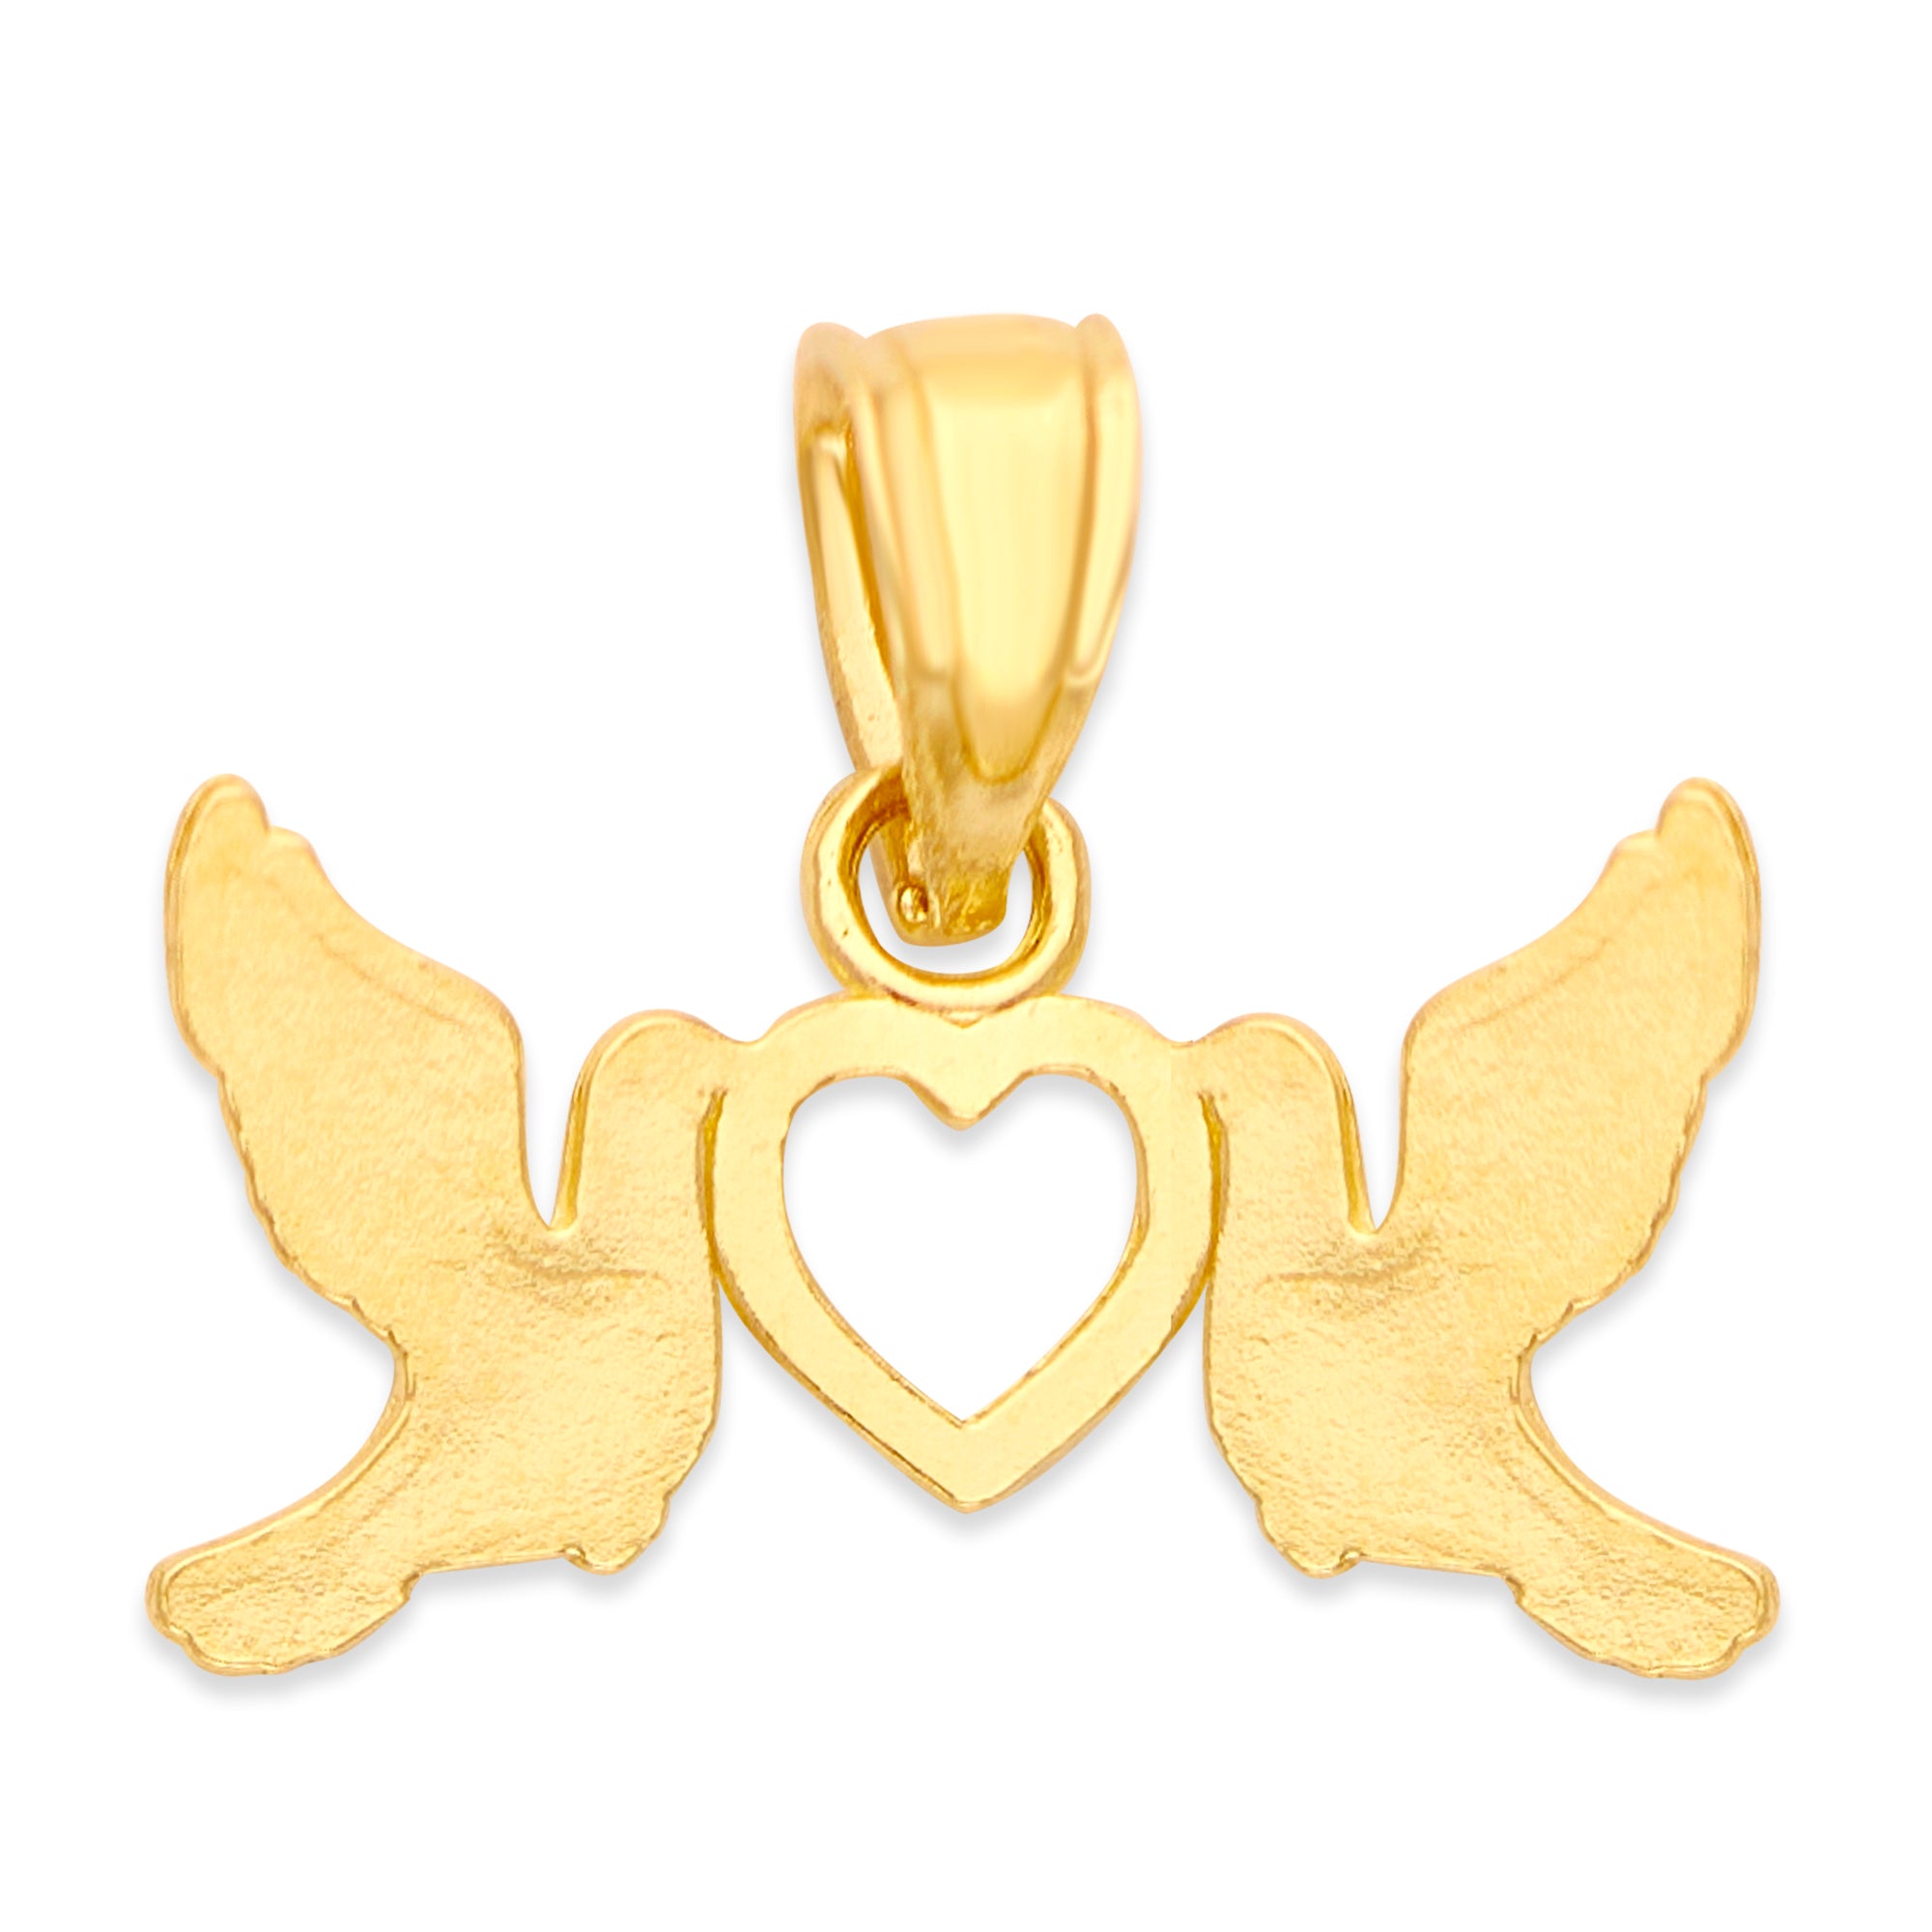 Solid Gold Doves with Heart Pendant - 10k or 14k